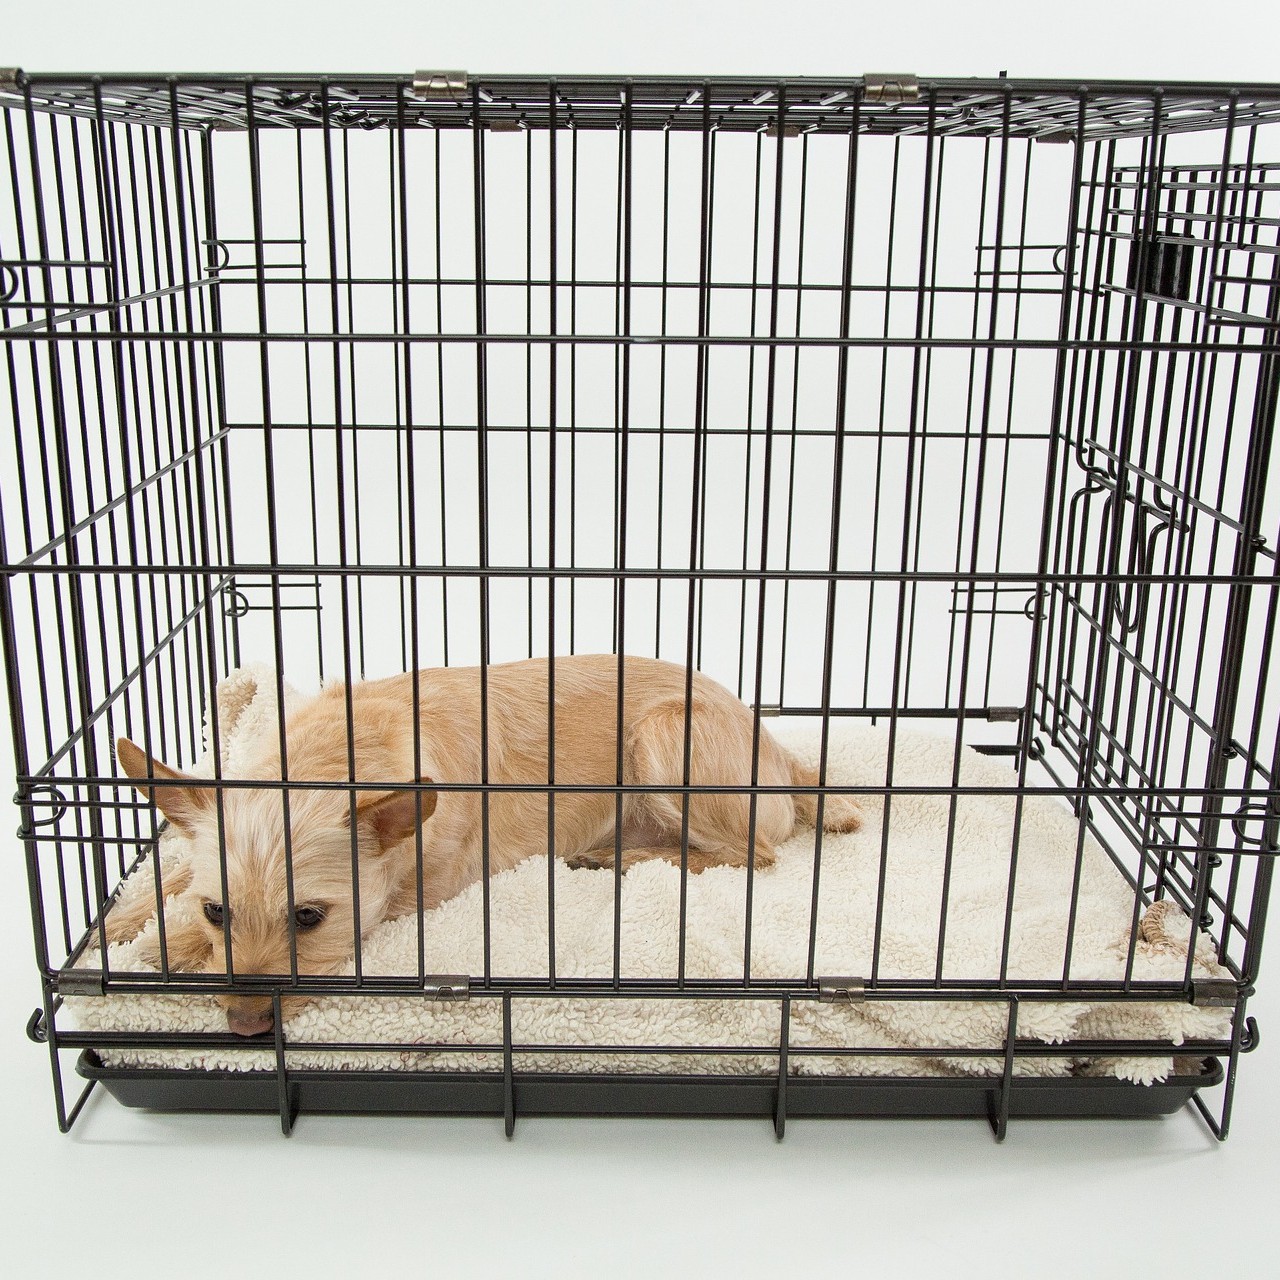 proselect dog cages